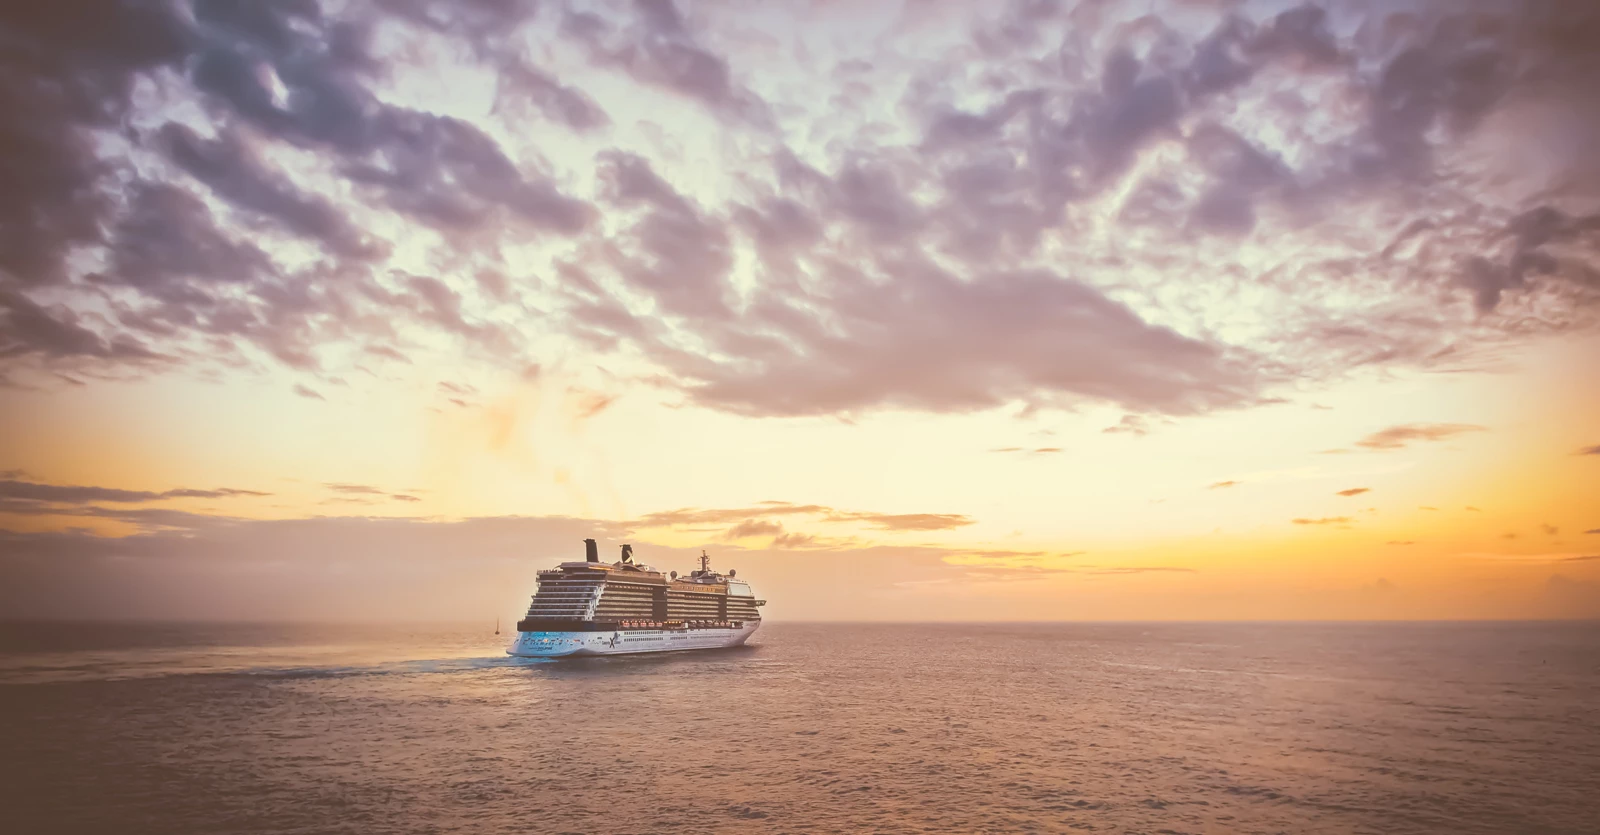 A large cruise ship sailing off into the sunset on a large blue ocean